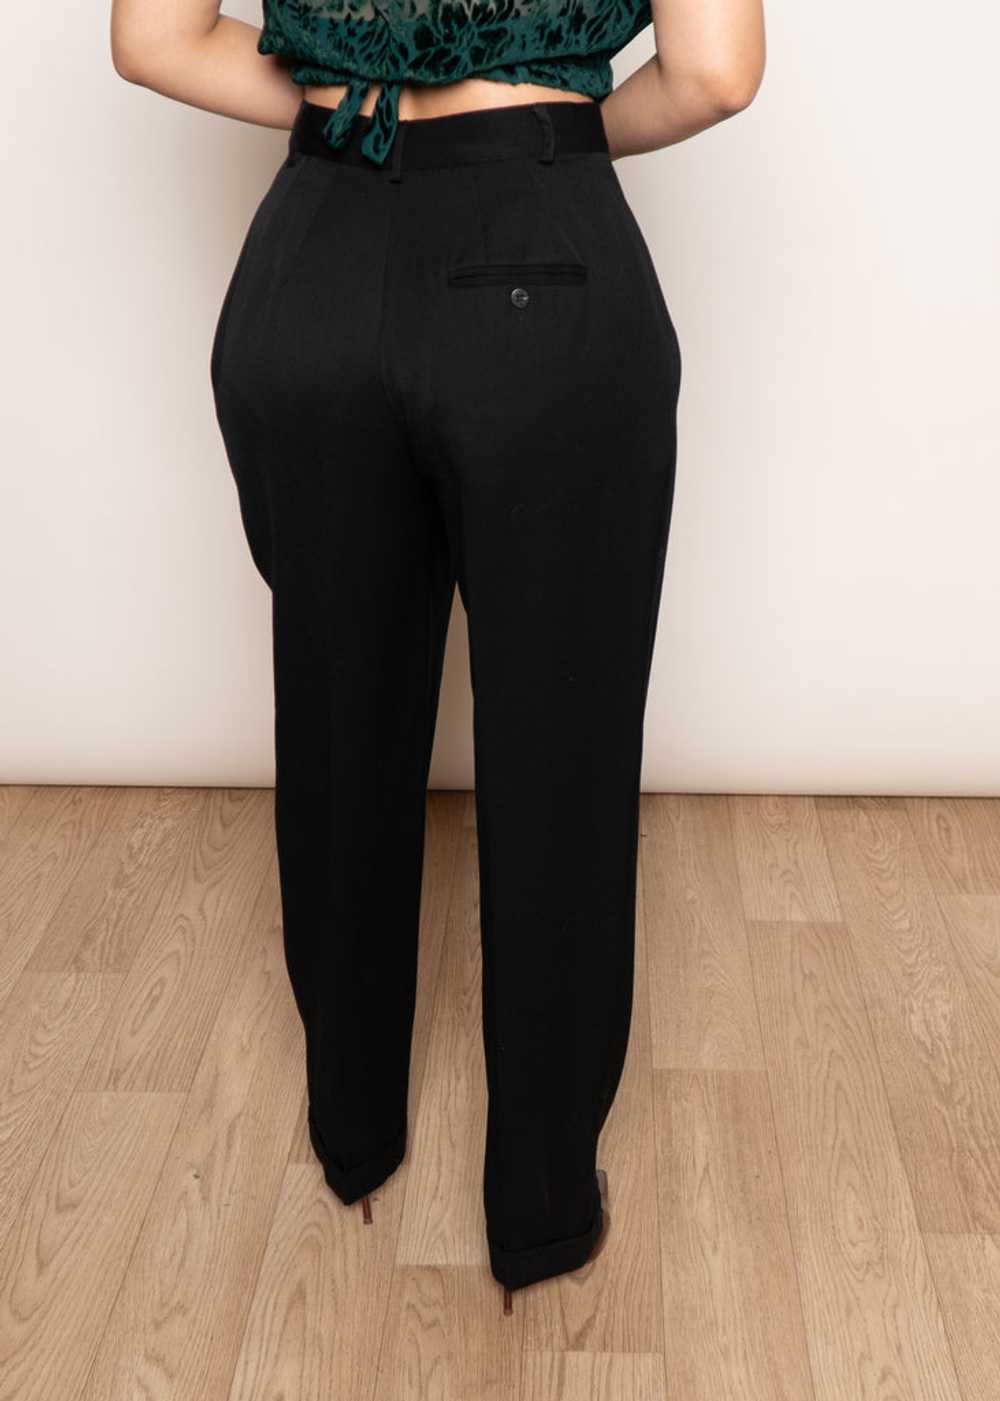 Black Pleated Trousers - image 2